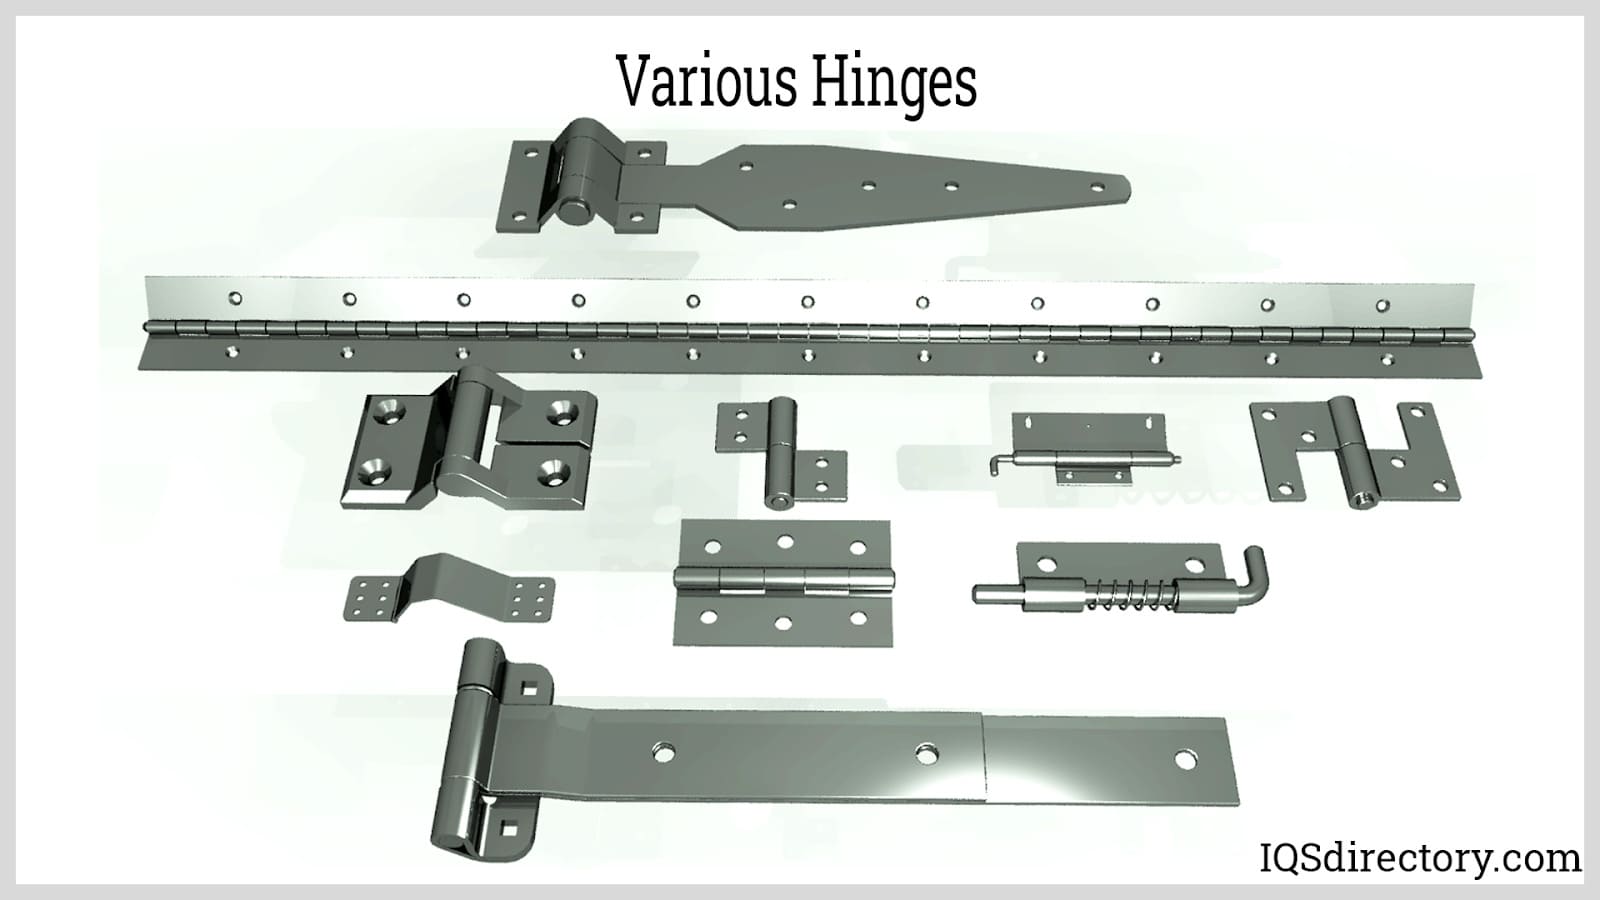 Types of Hinges